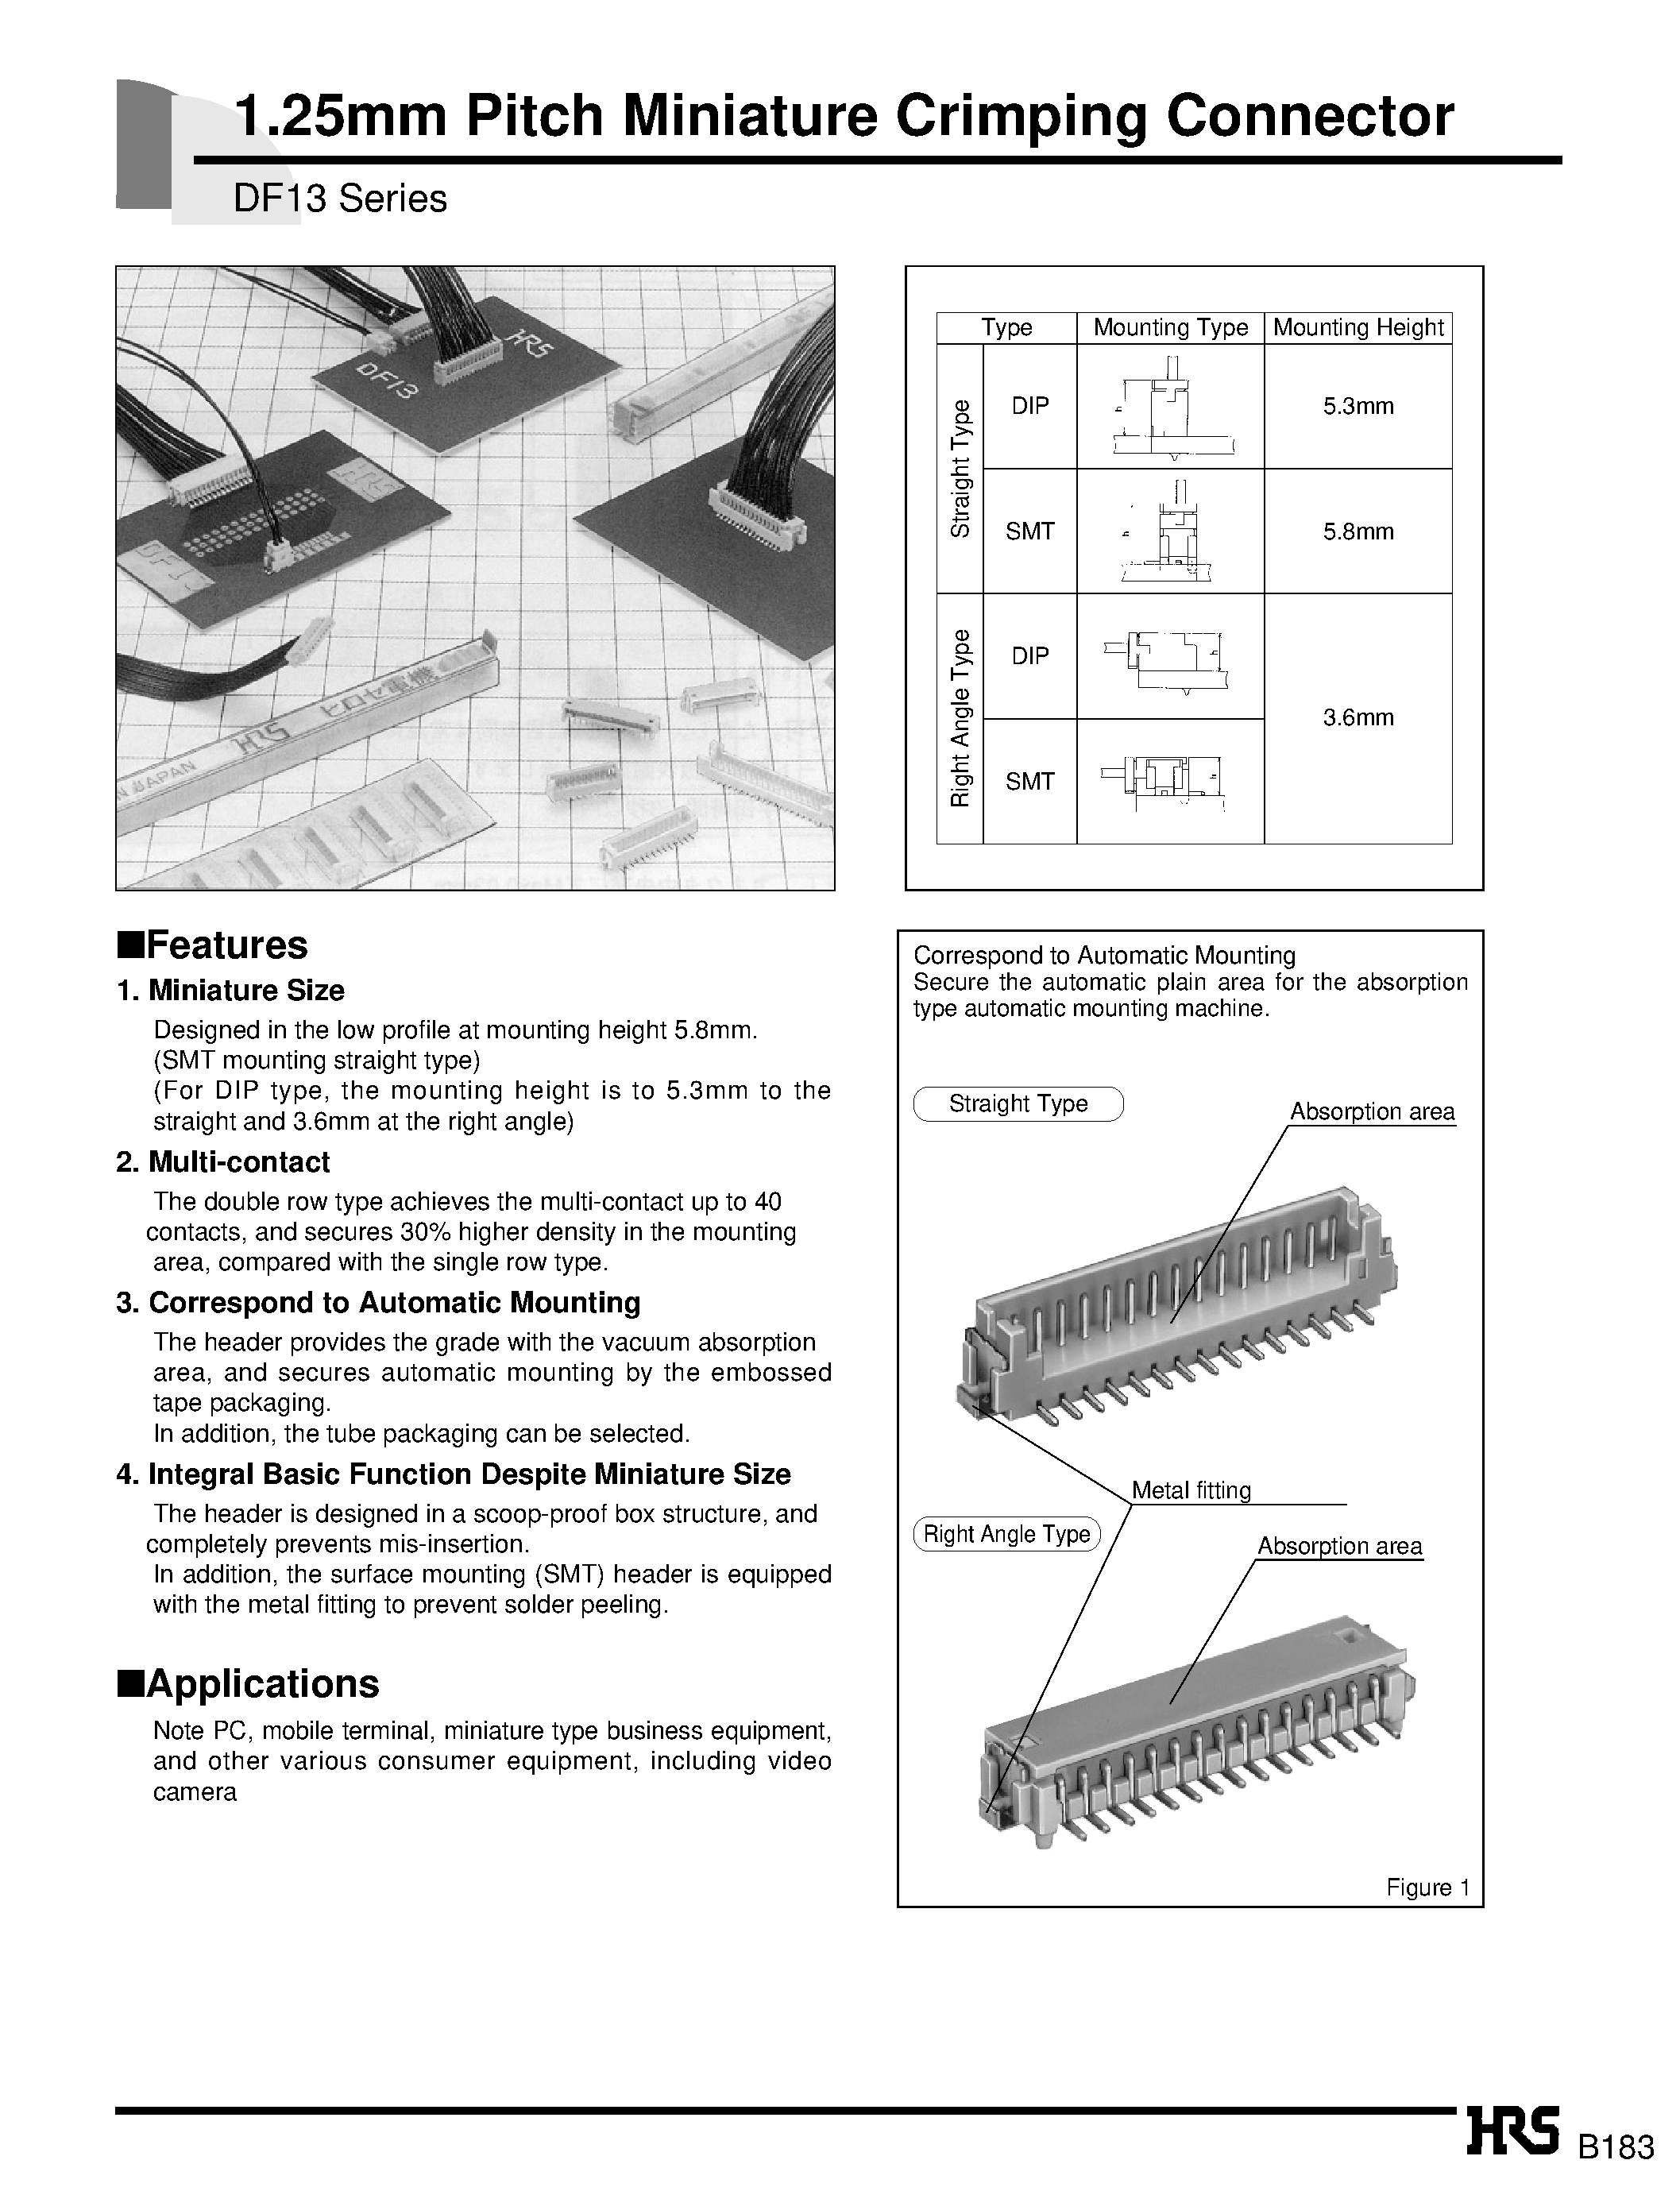 Datasheet DF13-11S-1.25DS - 1.25mm Pitch Miniature Crimping Connector page 1